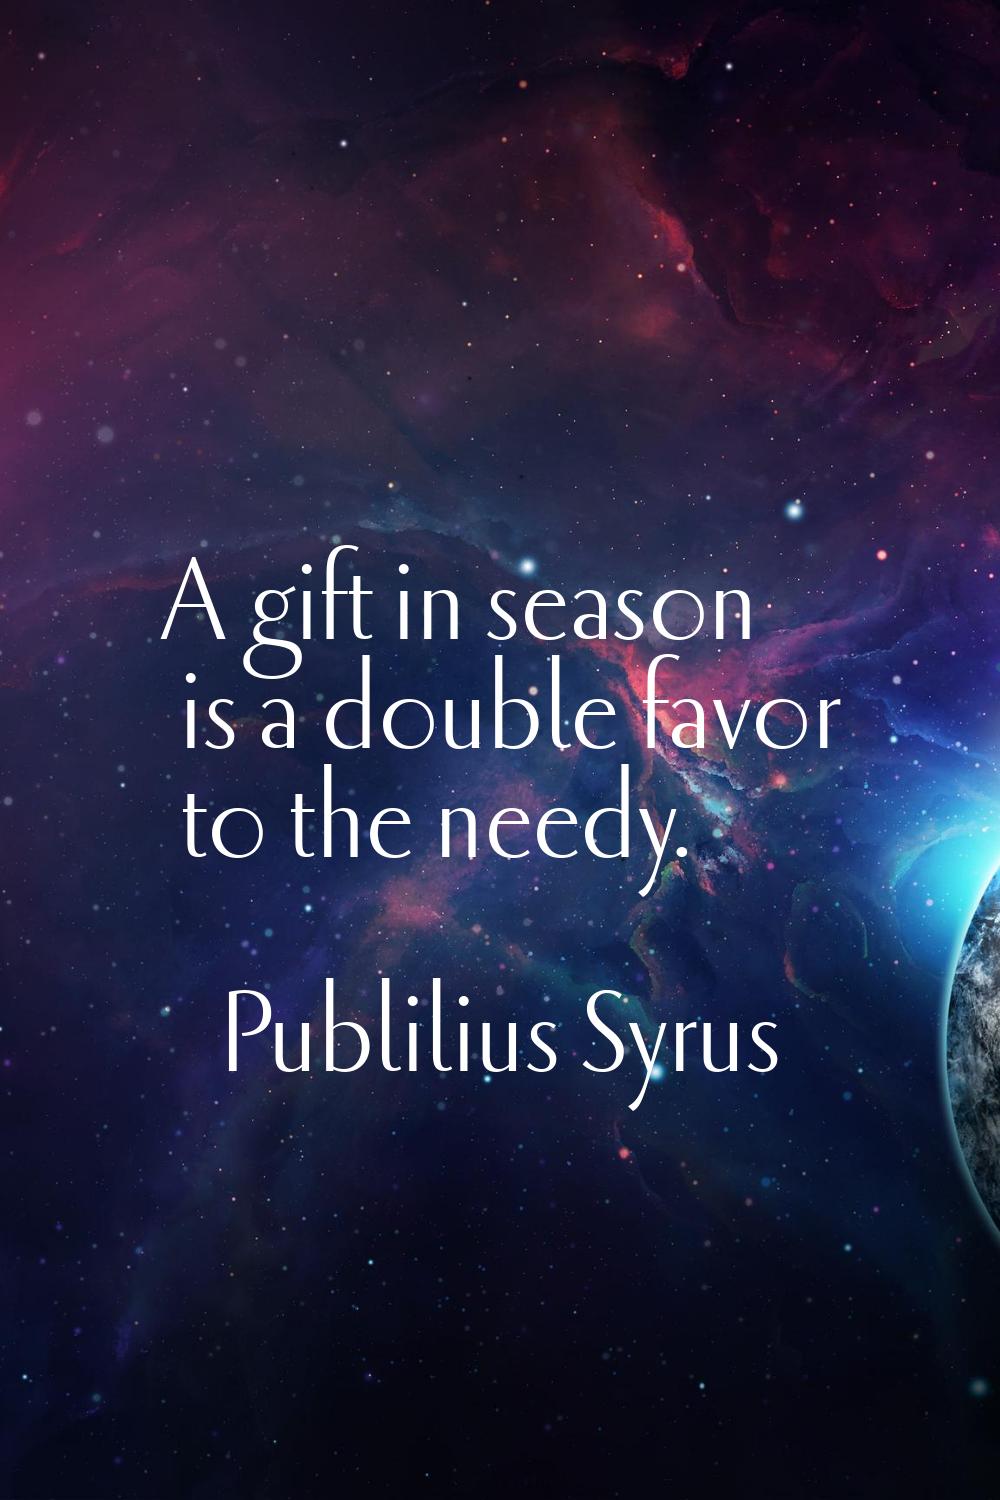 A gift in season is a double favor to the needy.